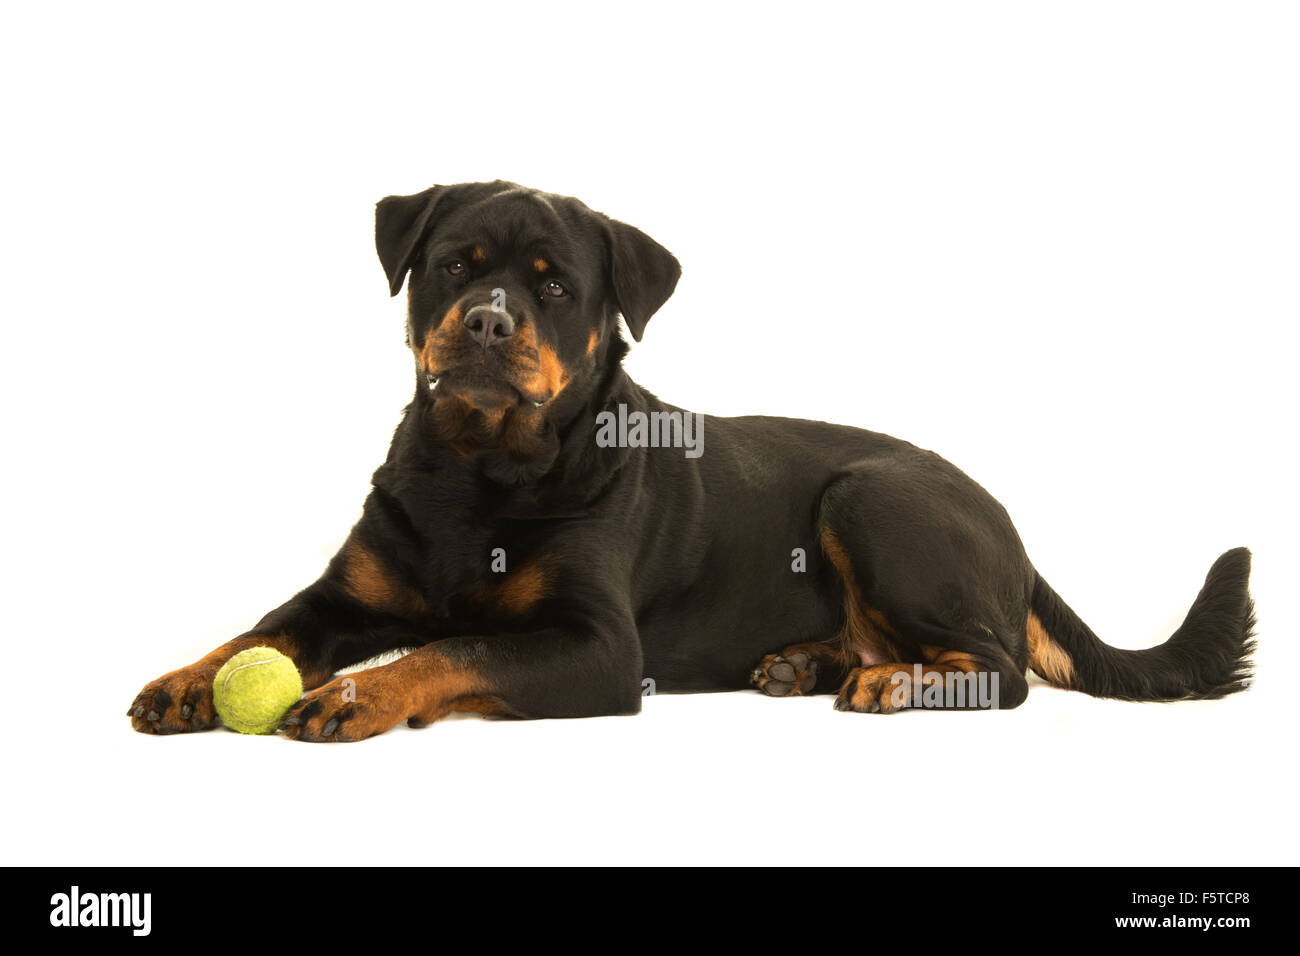 Lying down rottweiler dog with ball isolated on a white background Stock Photo